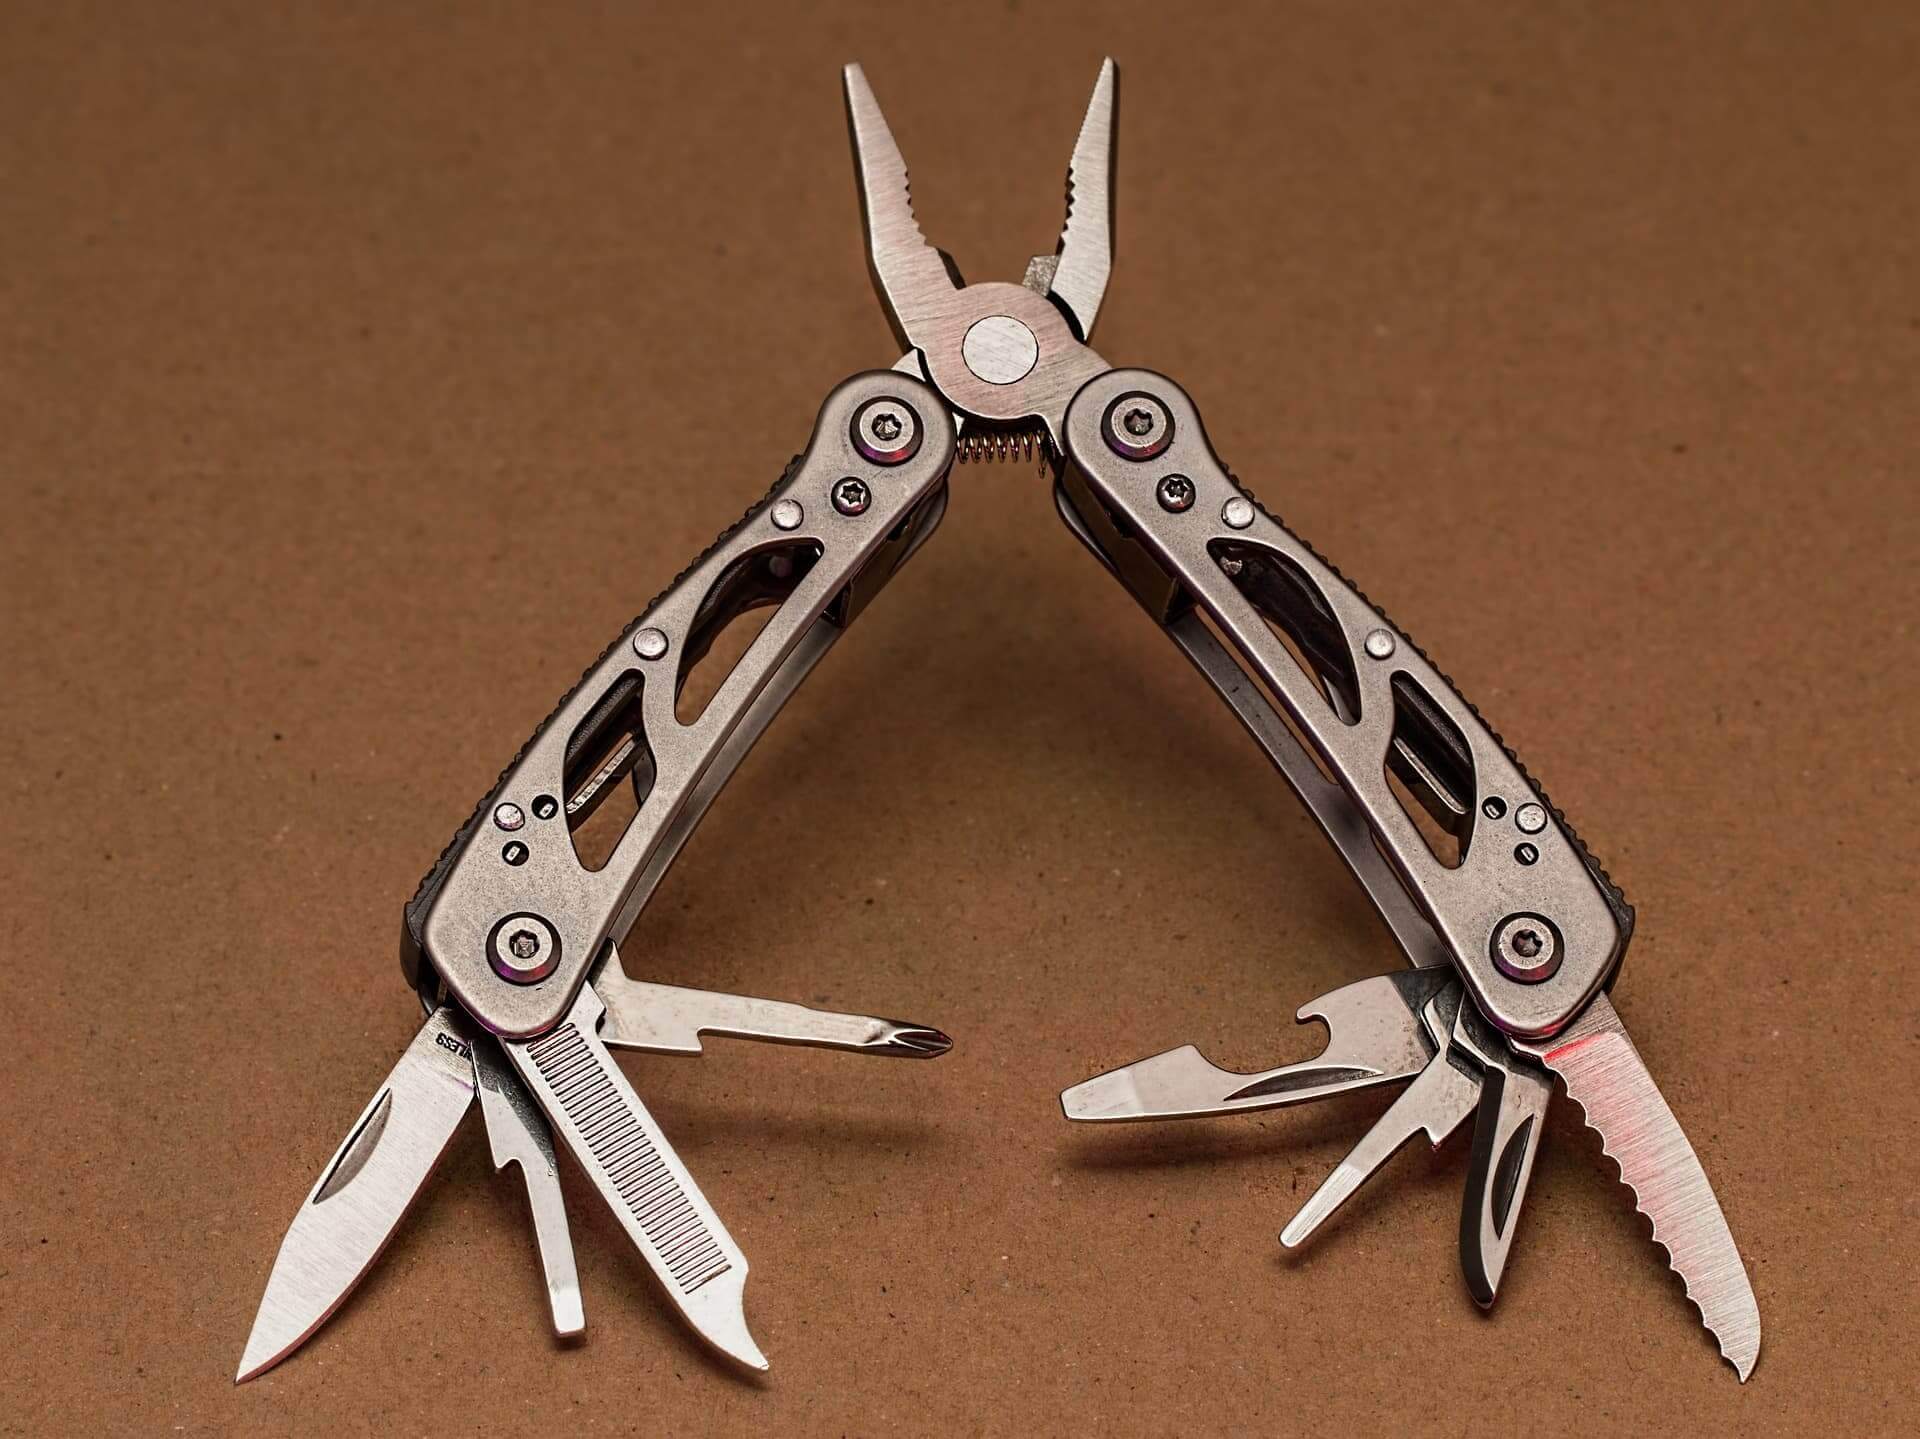 Multi-Tool or Toolkit Pros and Cons of Each